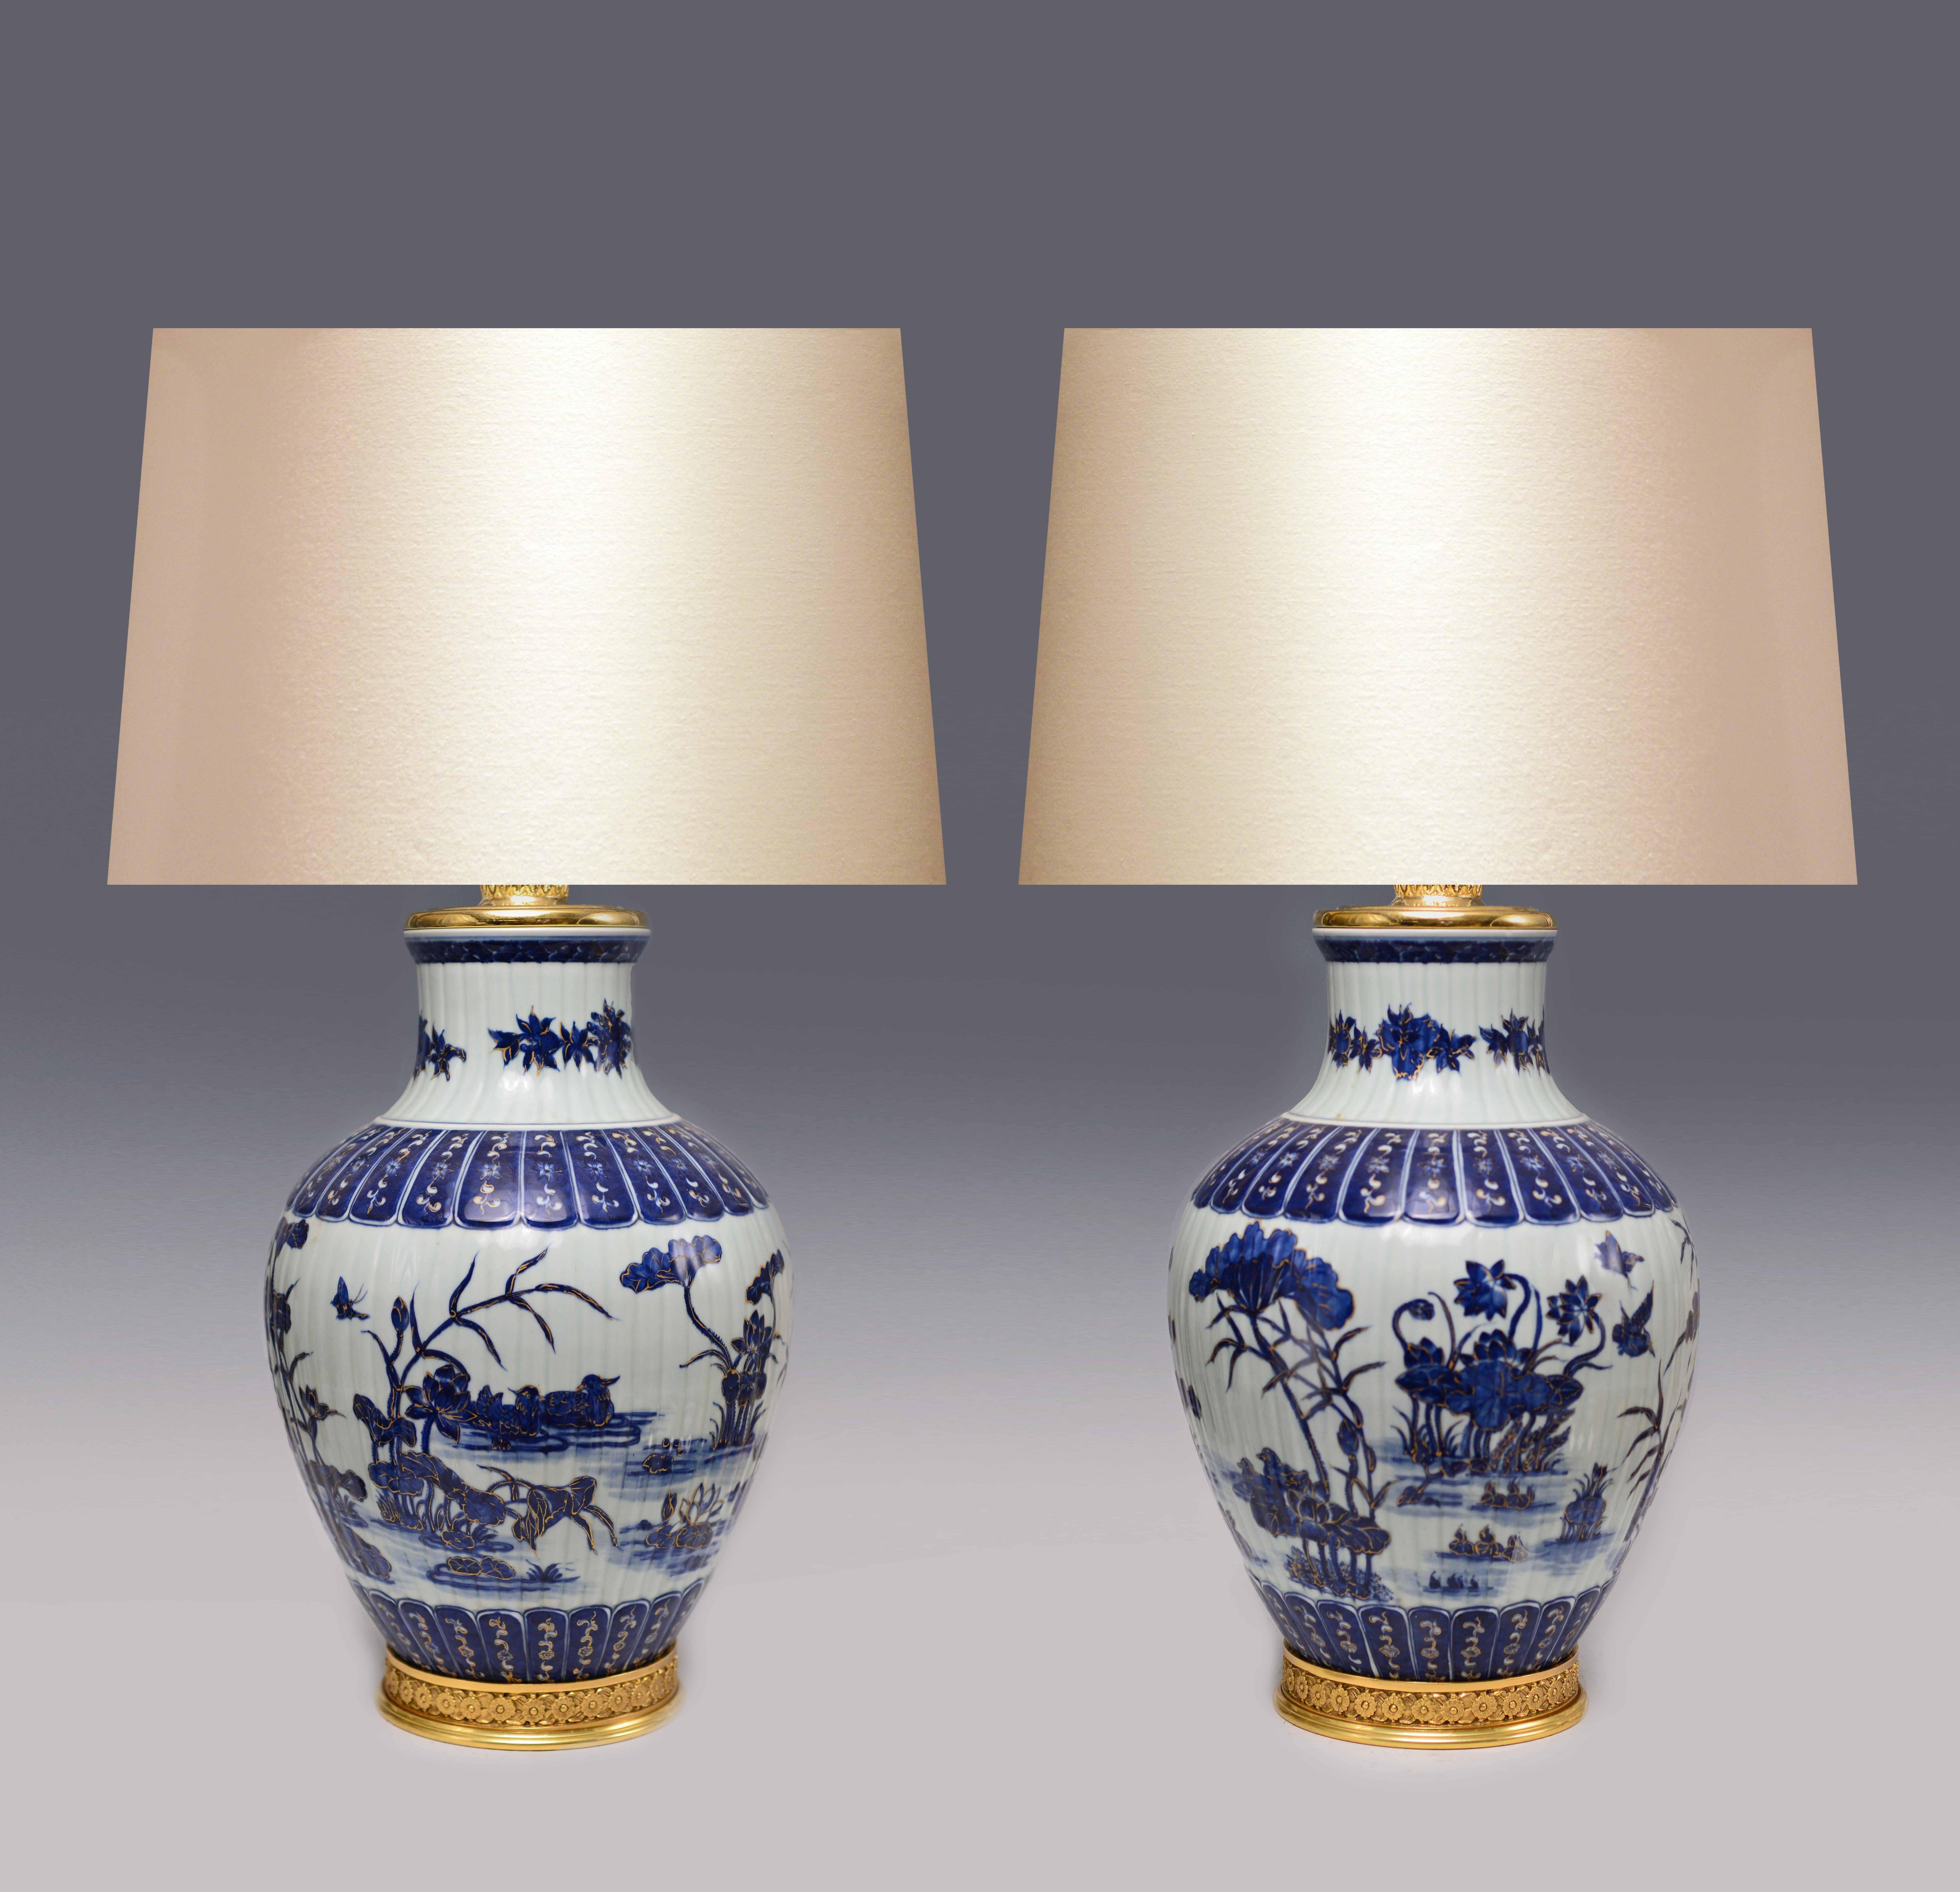 Pair of fine painted blue and white porcelain lamps with lotus and bird decoration, gilt bases. Measure: 18.5